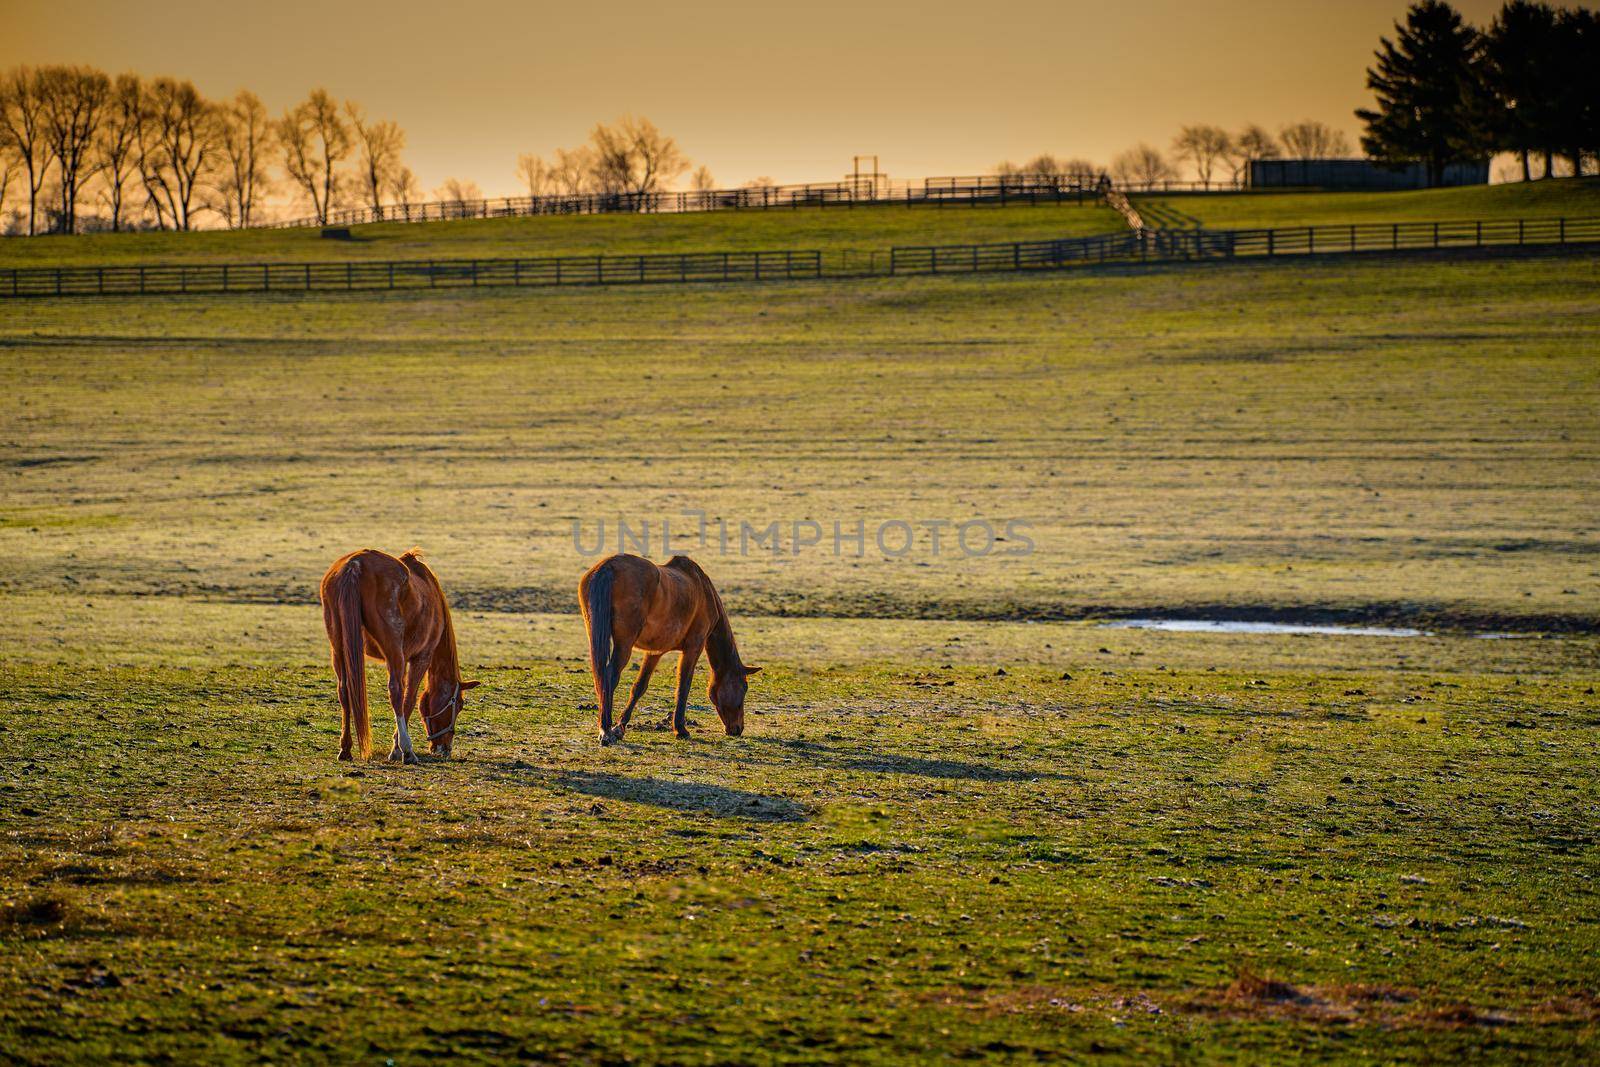 Two thoroughbred horses grazing in a field.